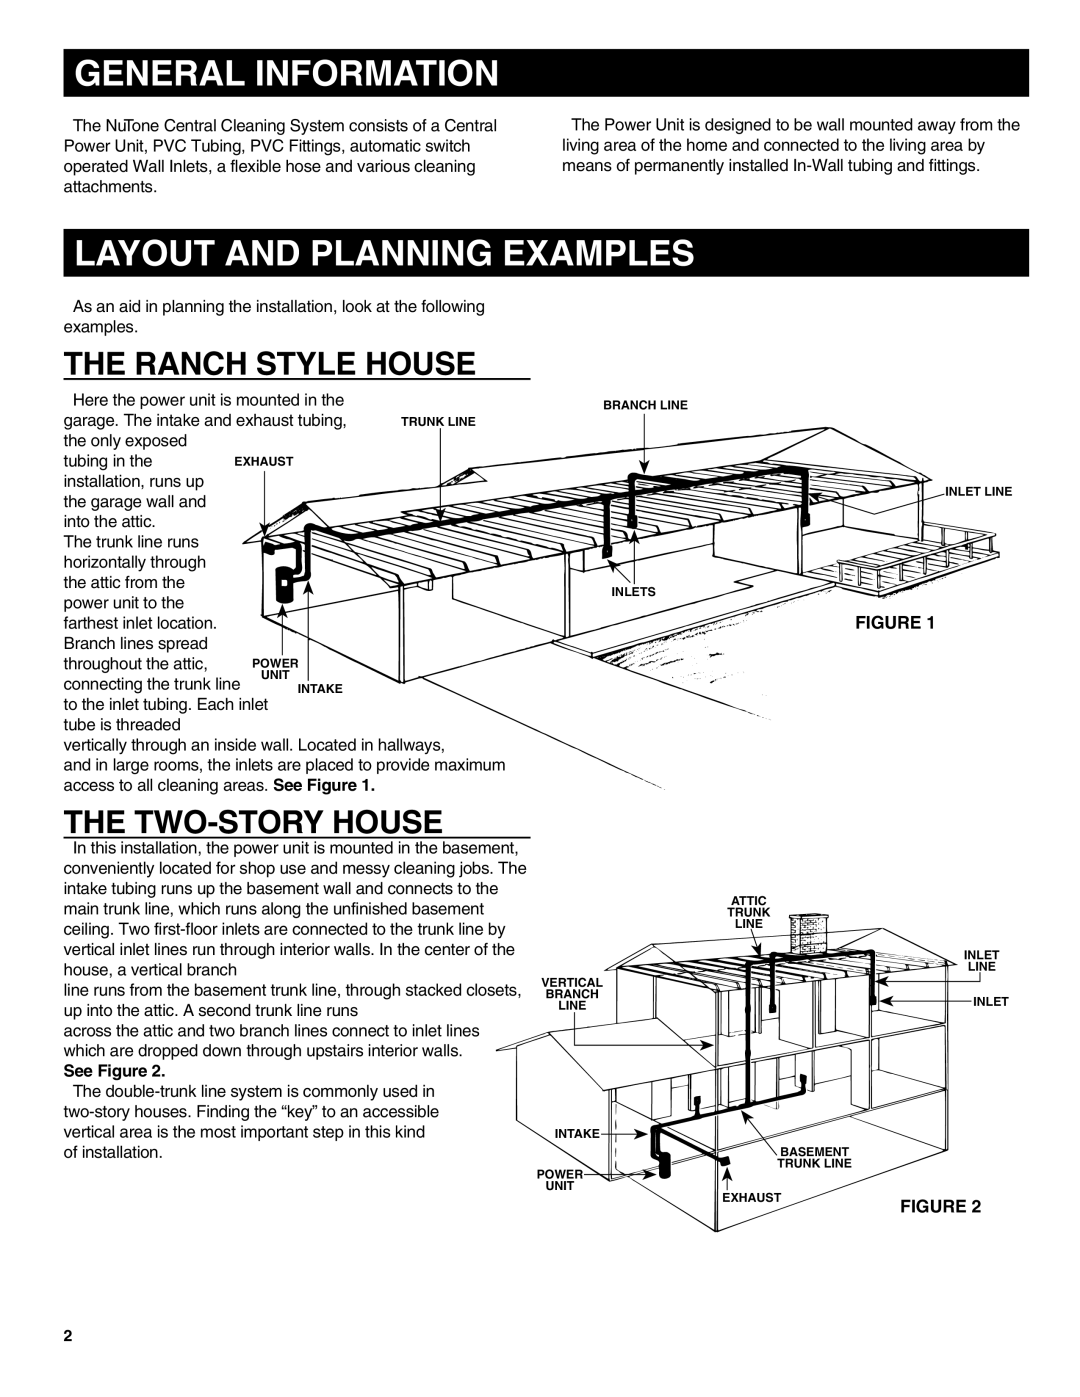 NuTone CV352 General Information, Layout And Planning Examples, The Ranch Style House, The Two-Storyhouse, See Figure 